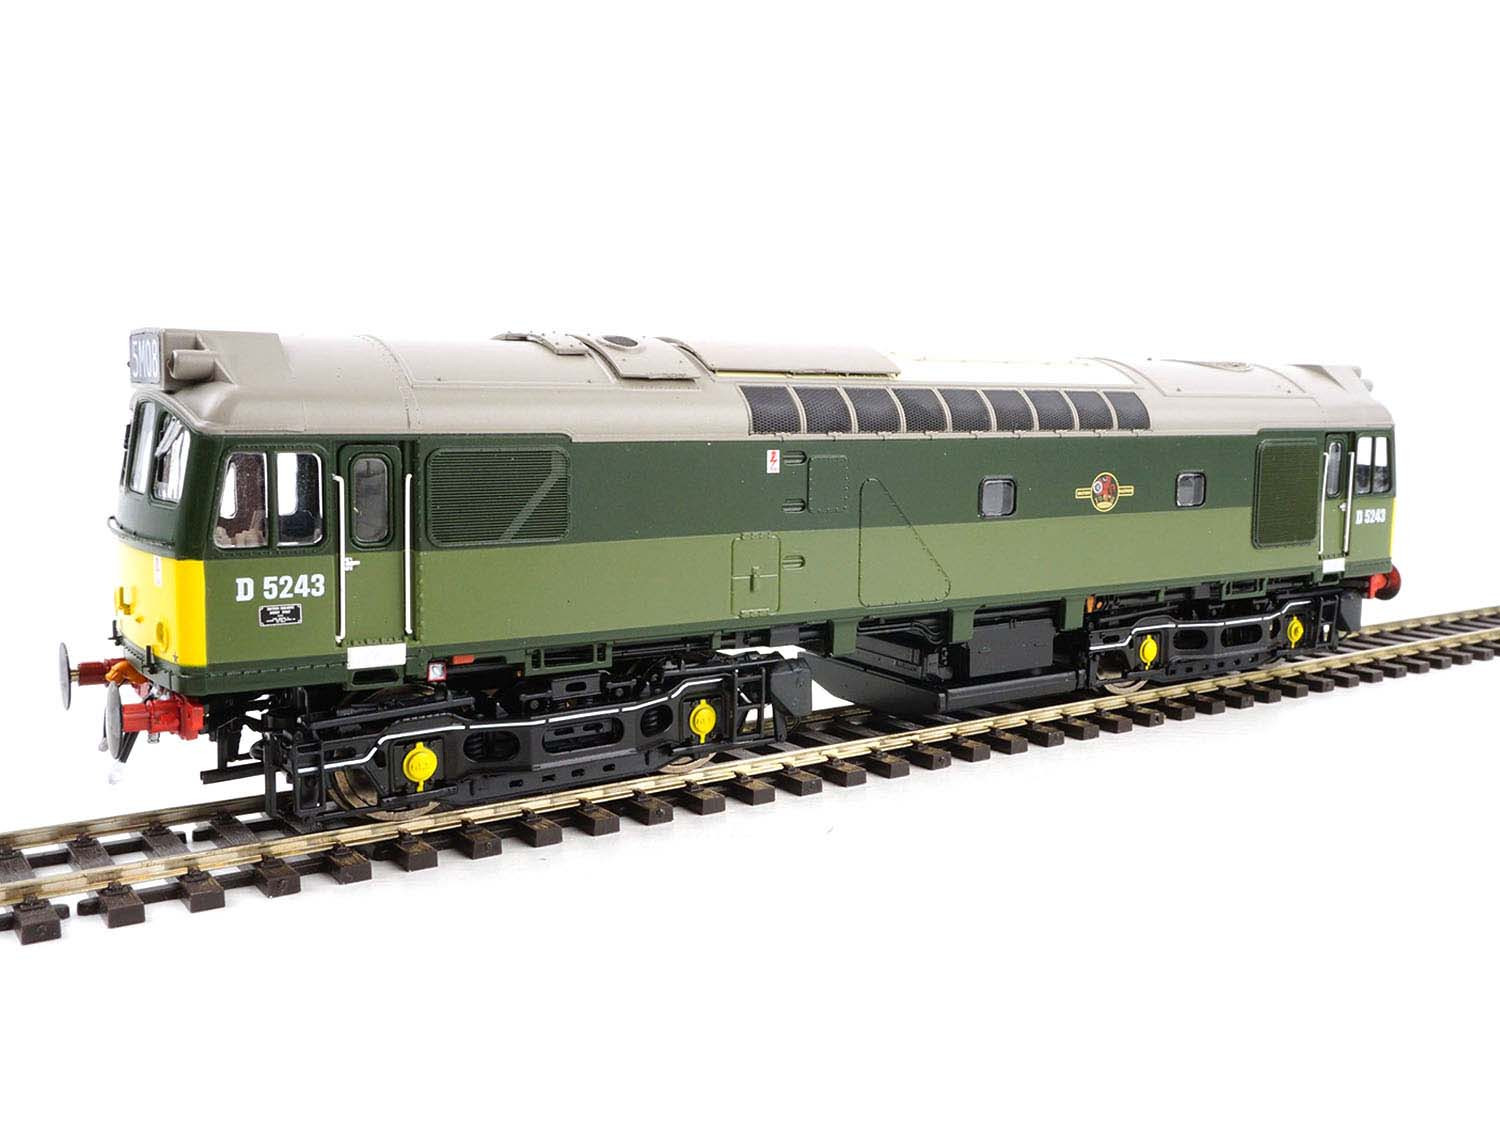 Heljan 2543 Class 25/3 D5243 BR Two Tone Green Small Yellow Panels